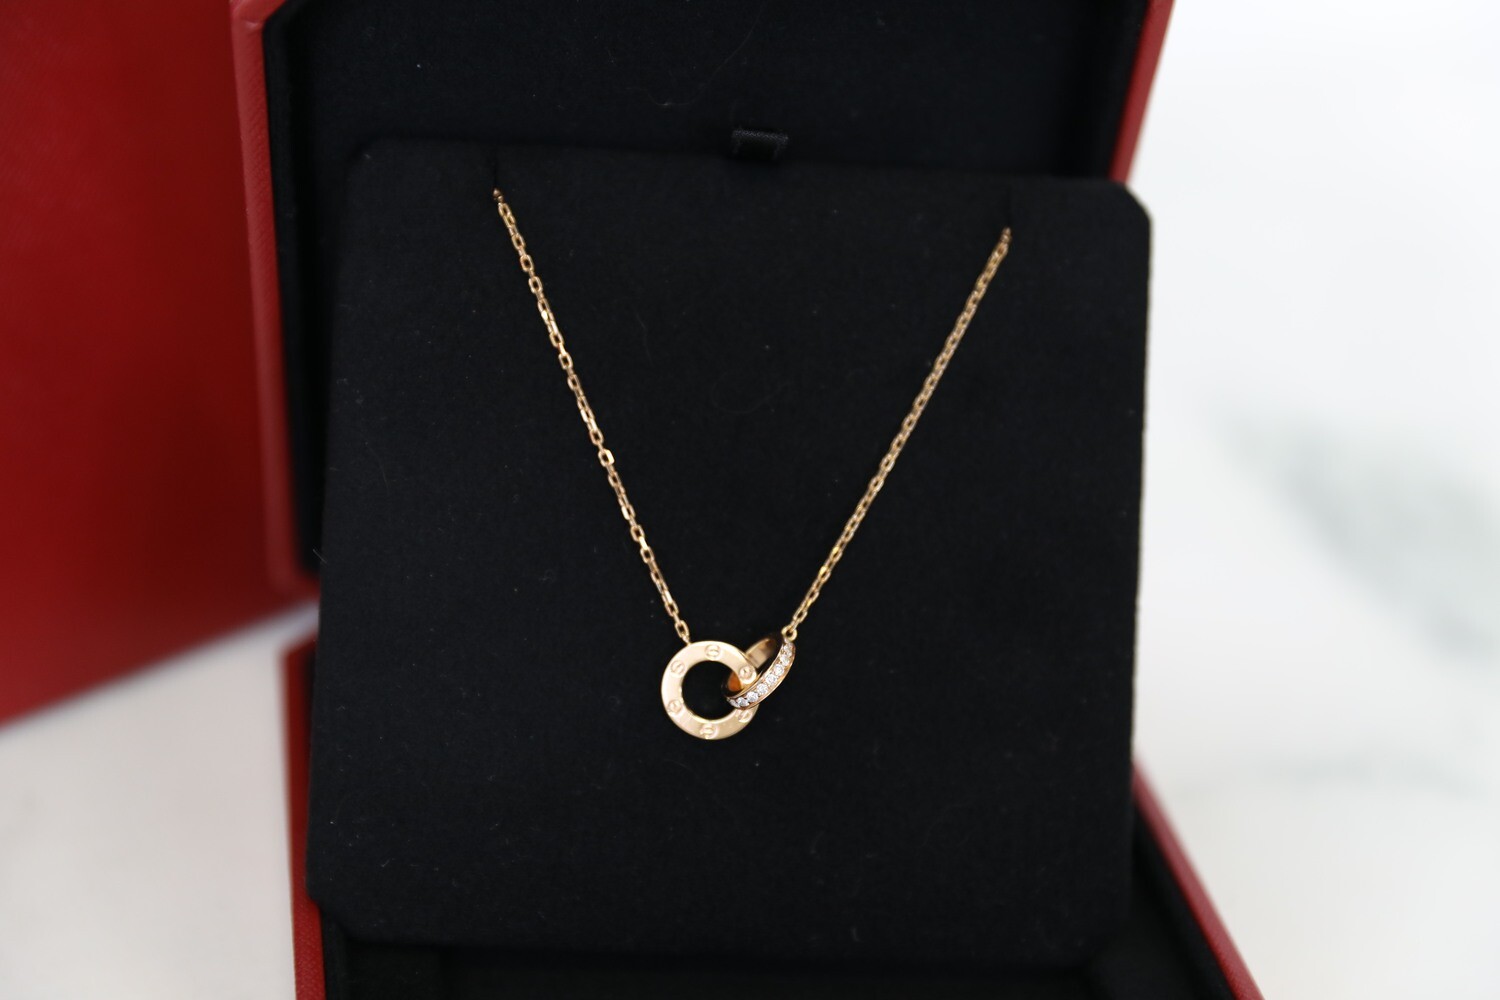 Cartier Love Necklace with Diamonds, Rose Gold, Preowned in Box WA001